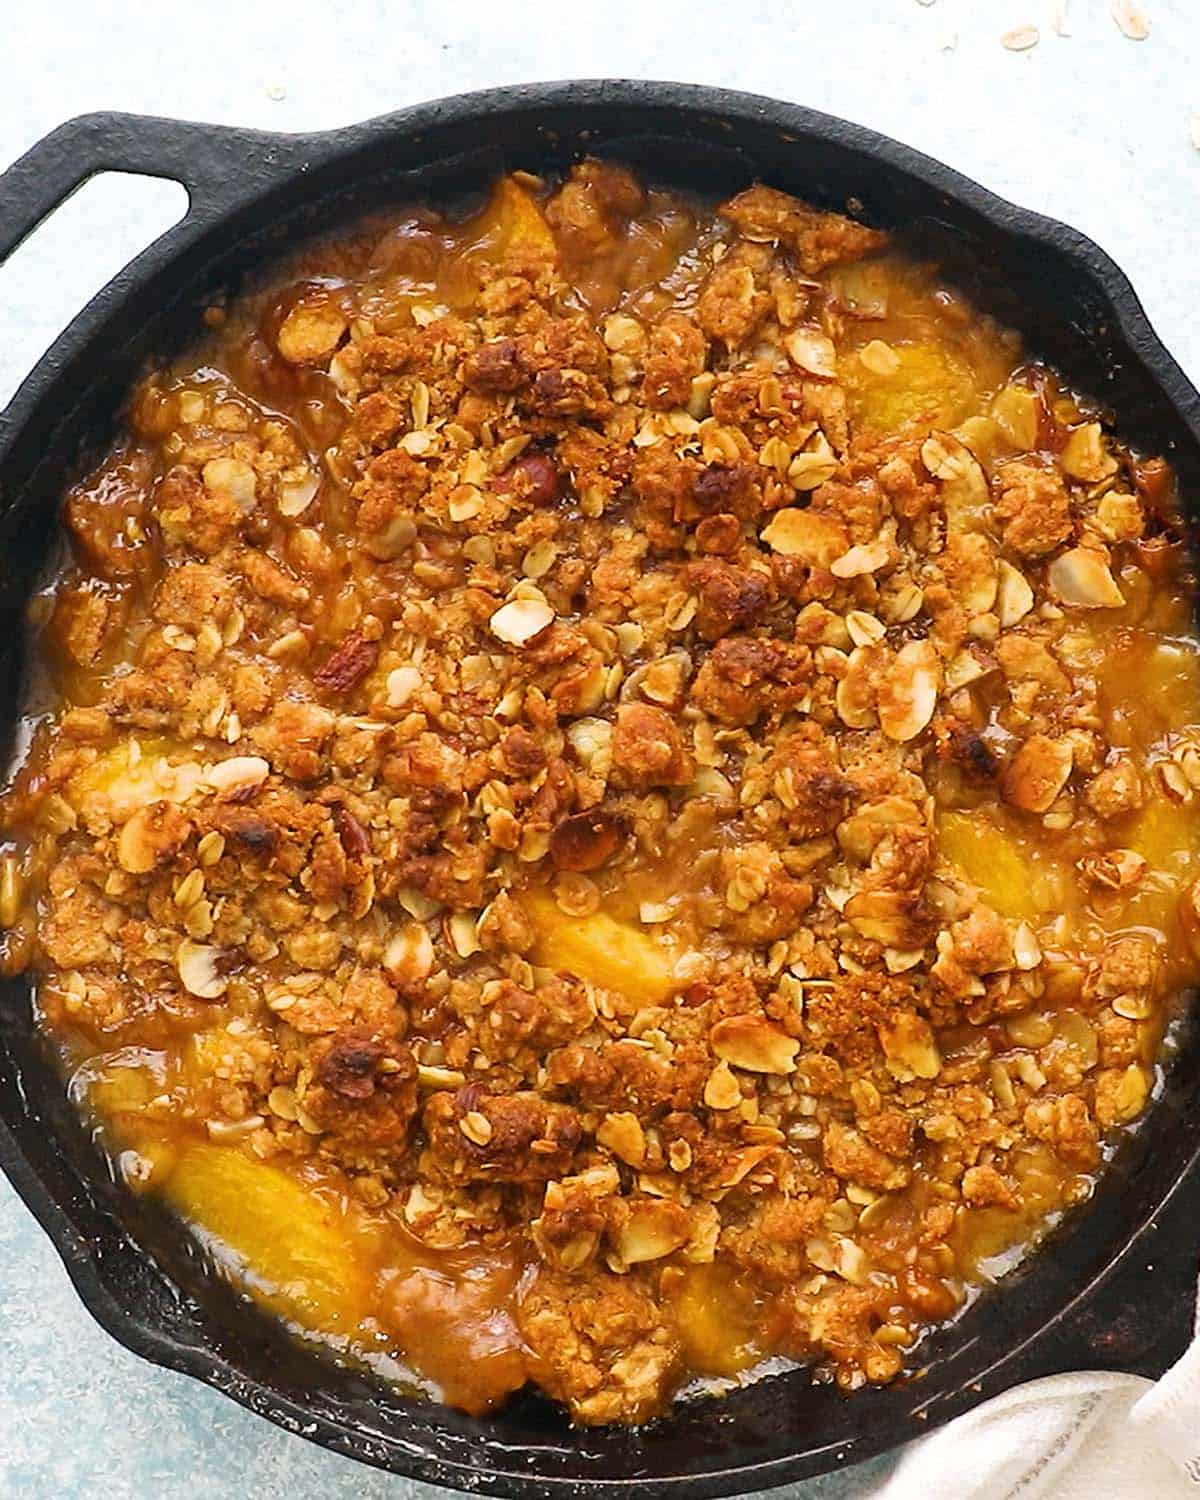 baked peach crumble in a black skillet.